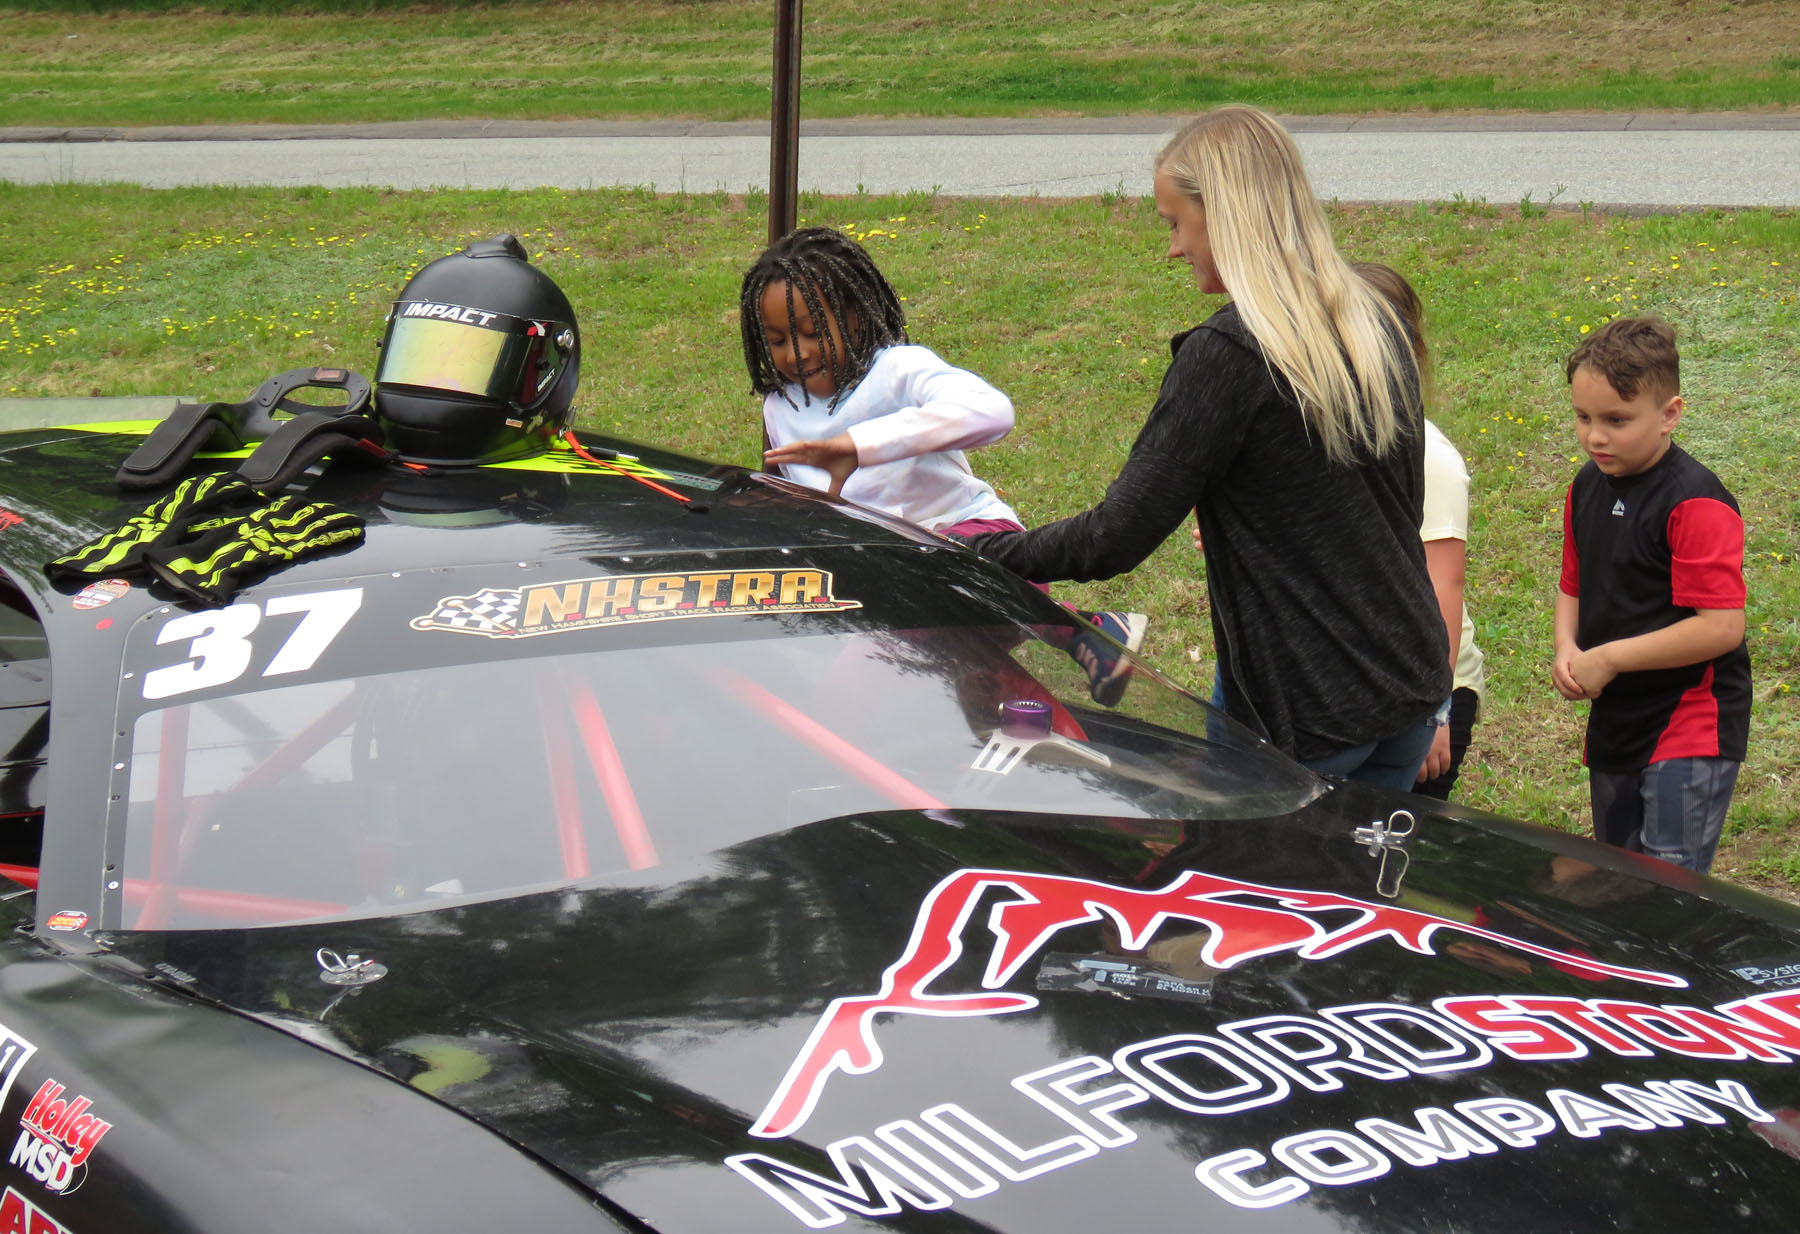 Memorial students and race cars